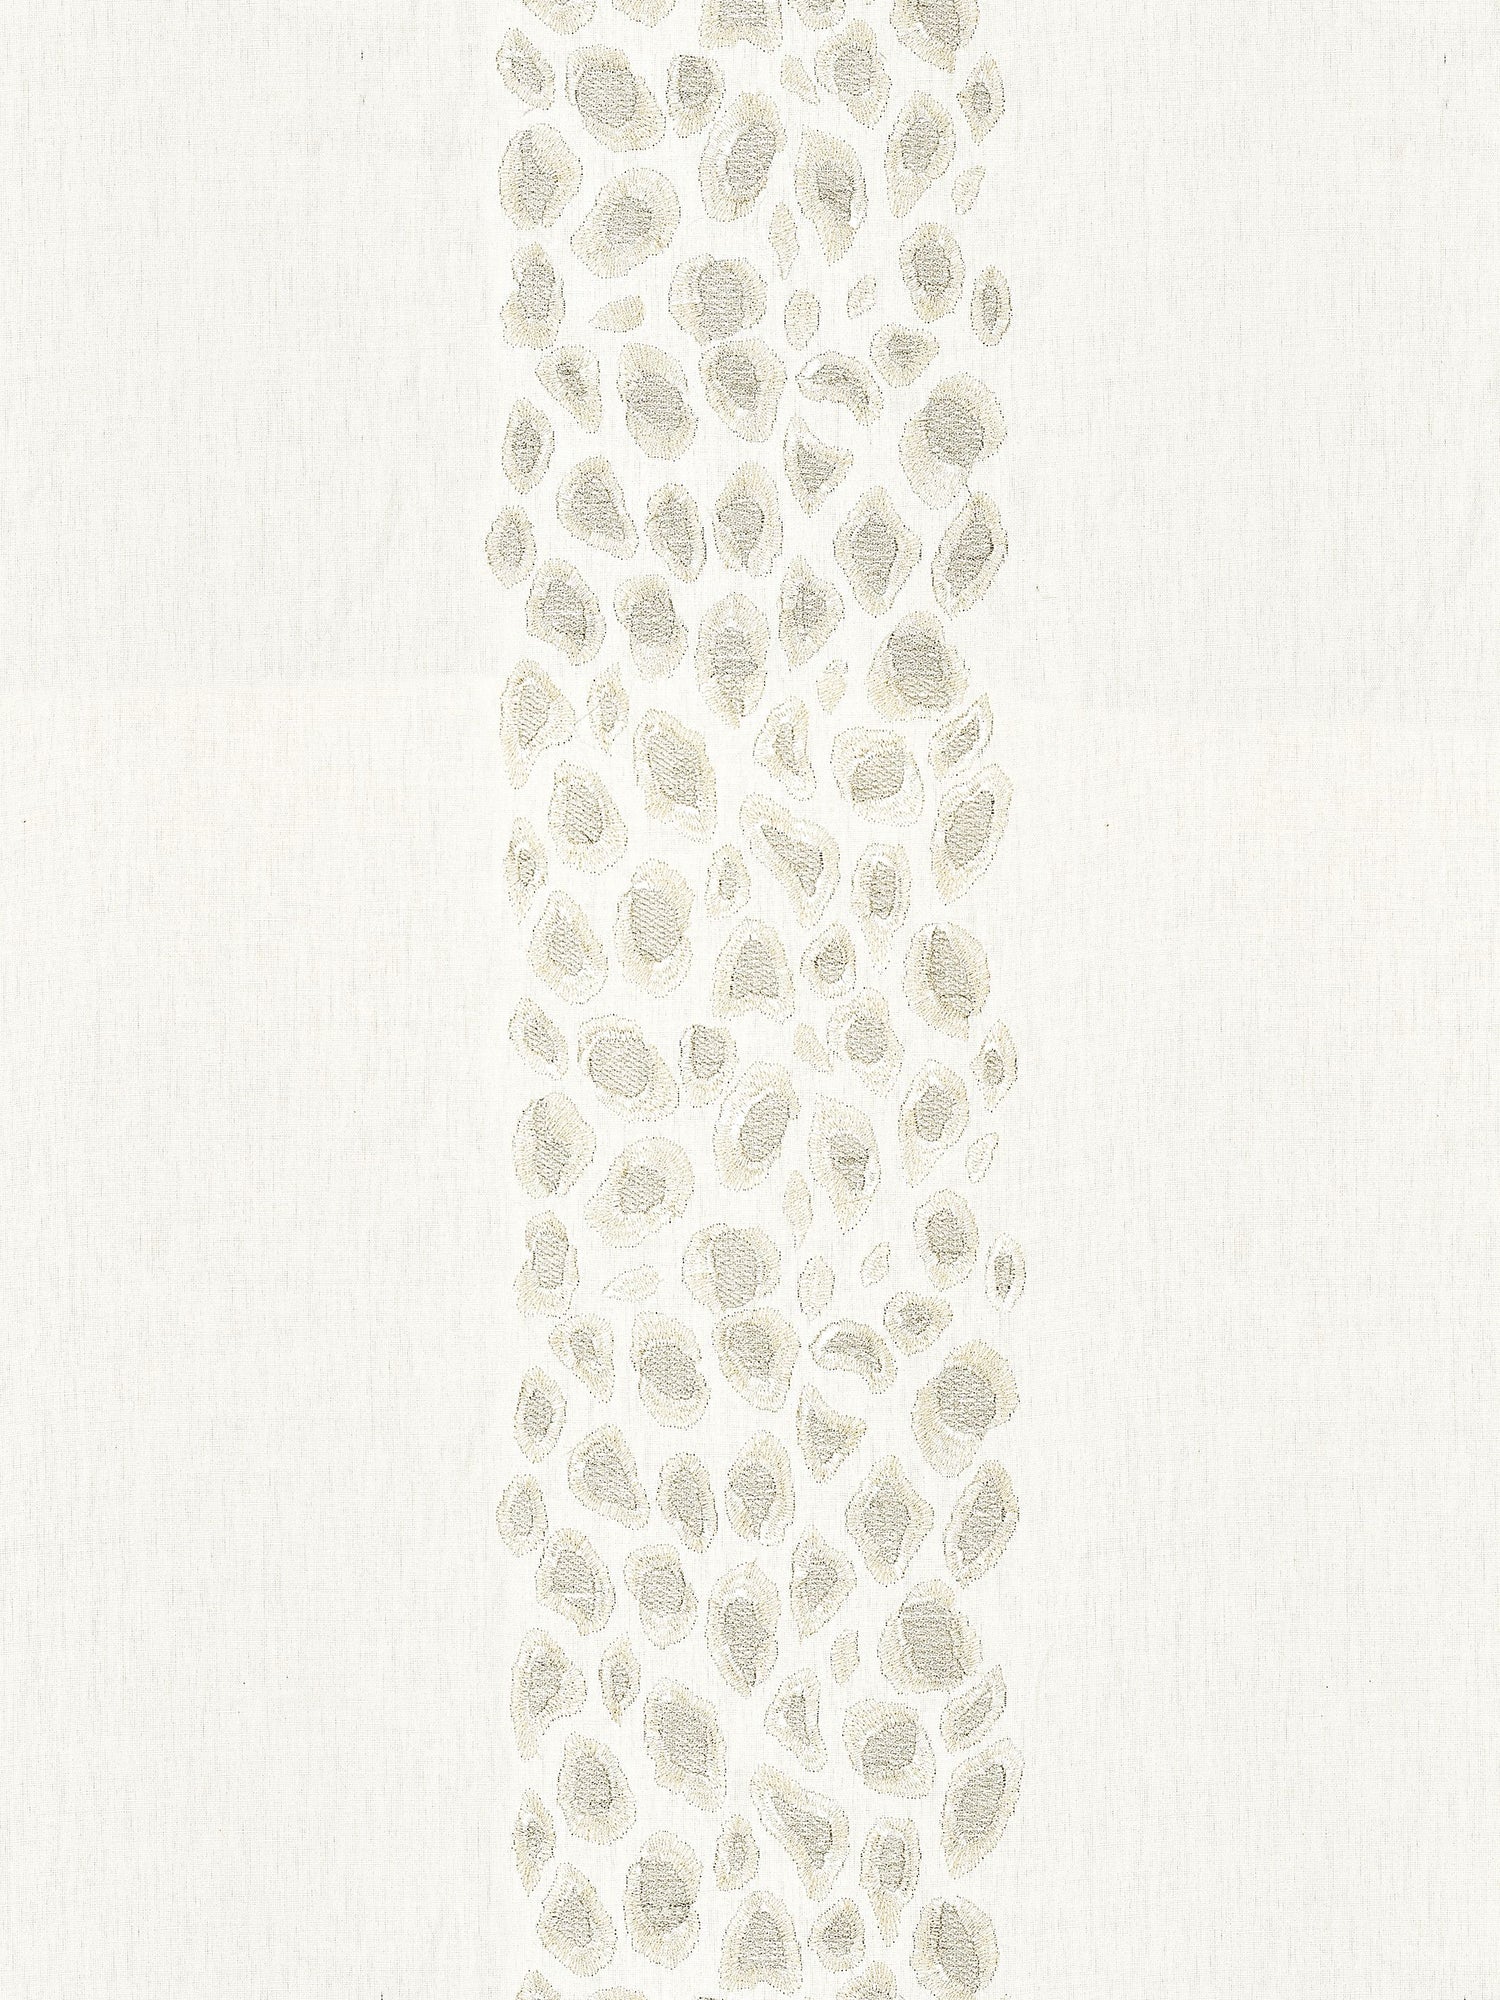 Catwalk Embroidery fabric in pearl color - pattern number SC 000127255 - by Scalamandre in the Scalamandre Fabrics Book 1 collection